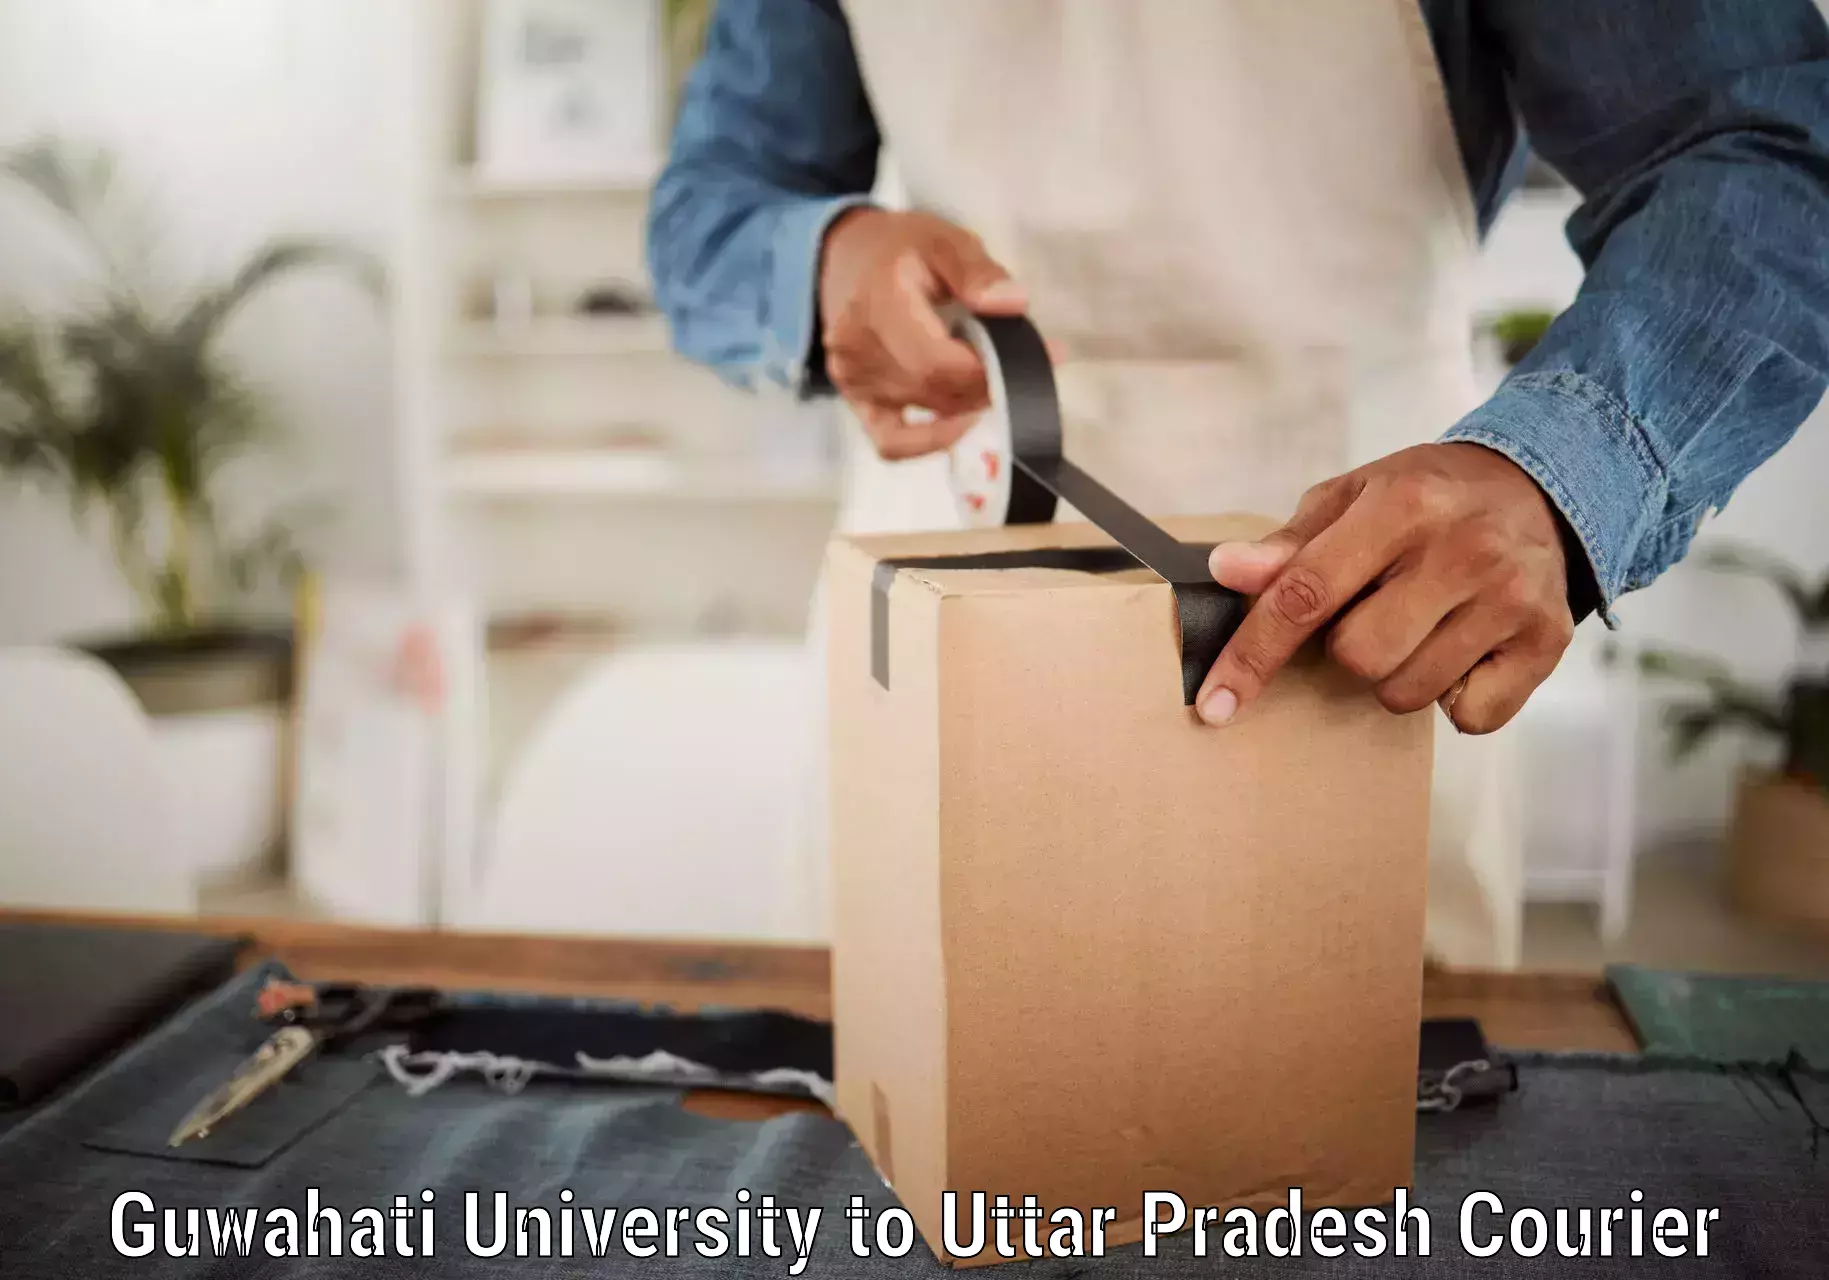 Package delivery network Guwahati University to Mathura